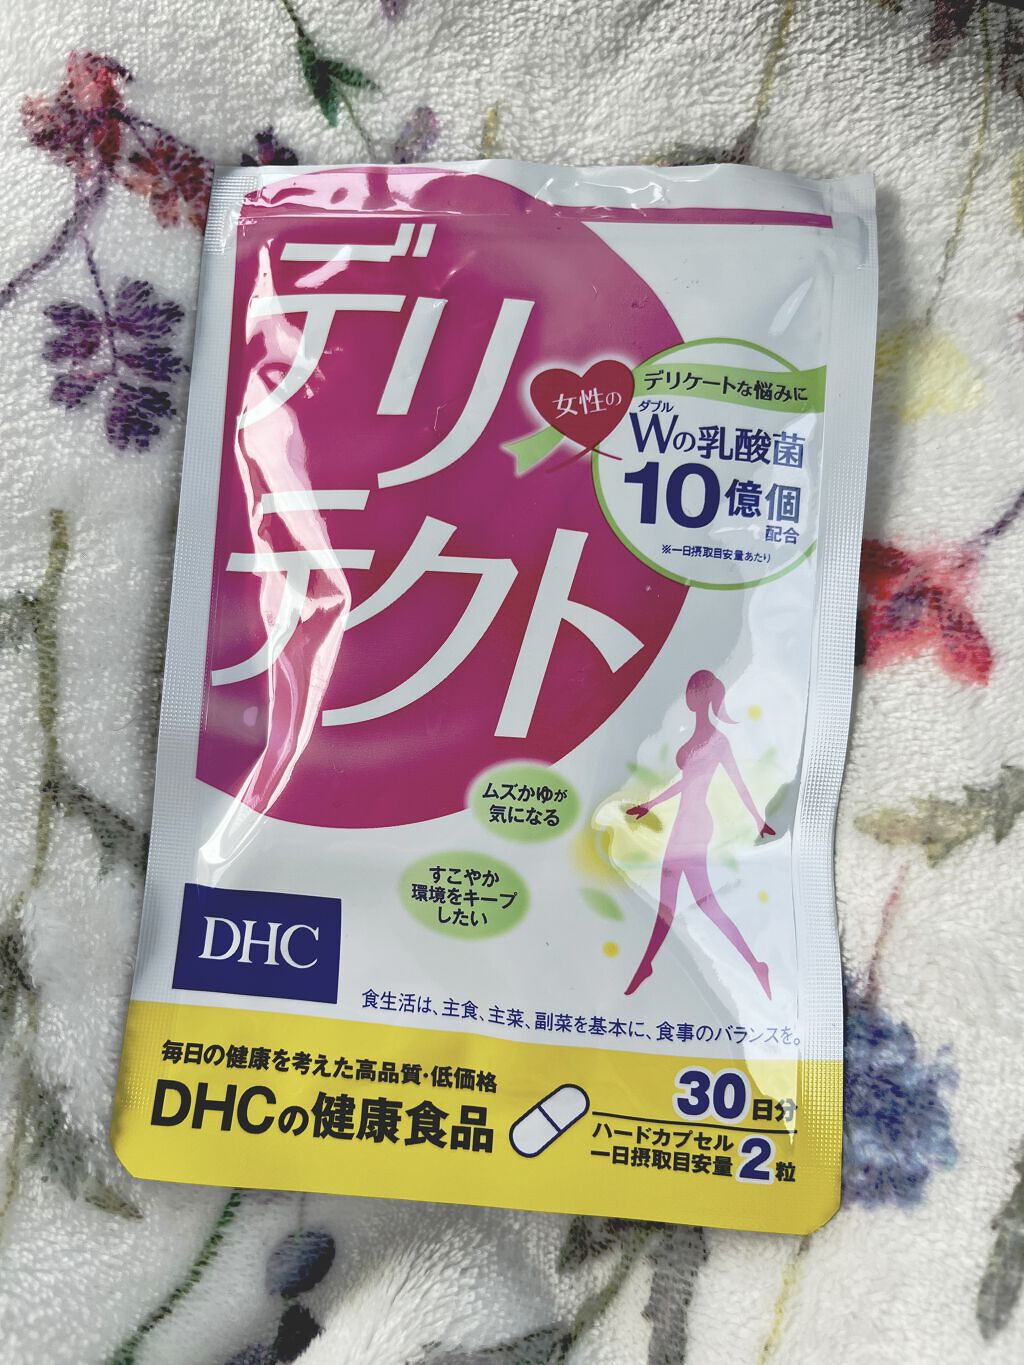 DHC デリテクト 30日分 2袋 通販